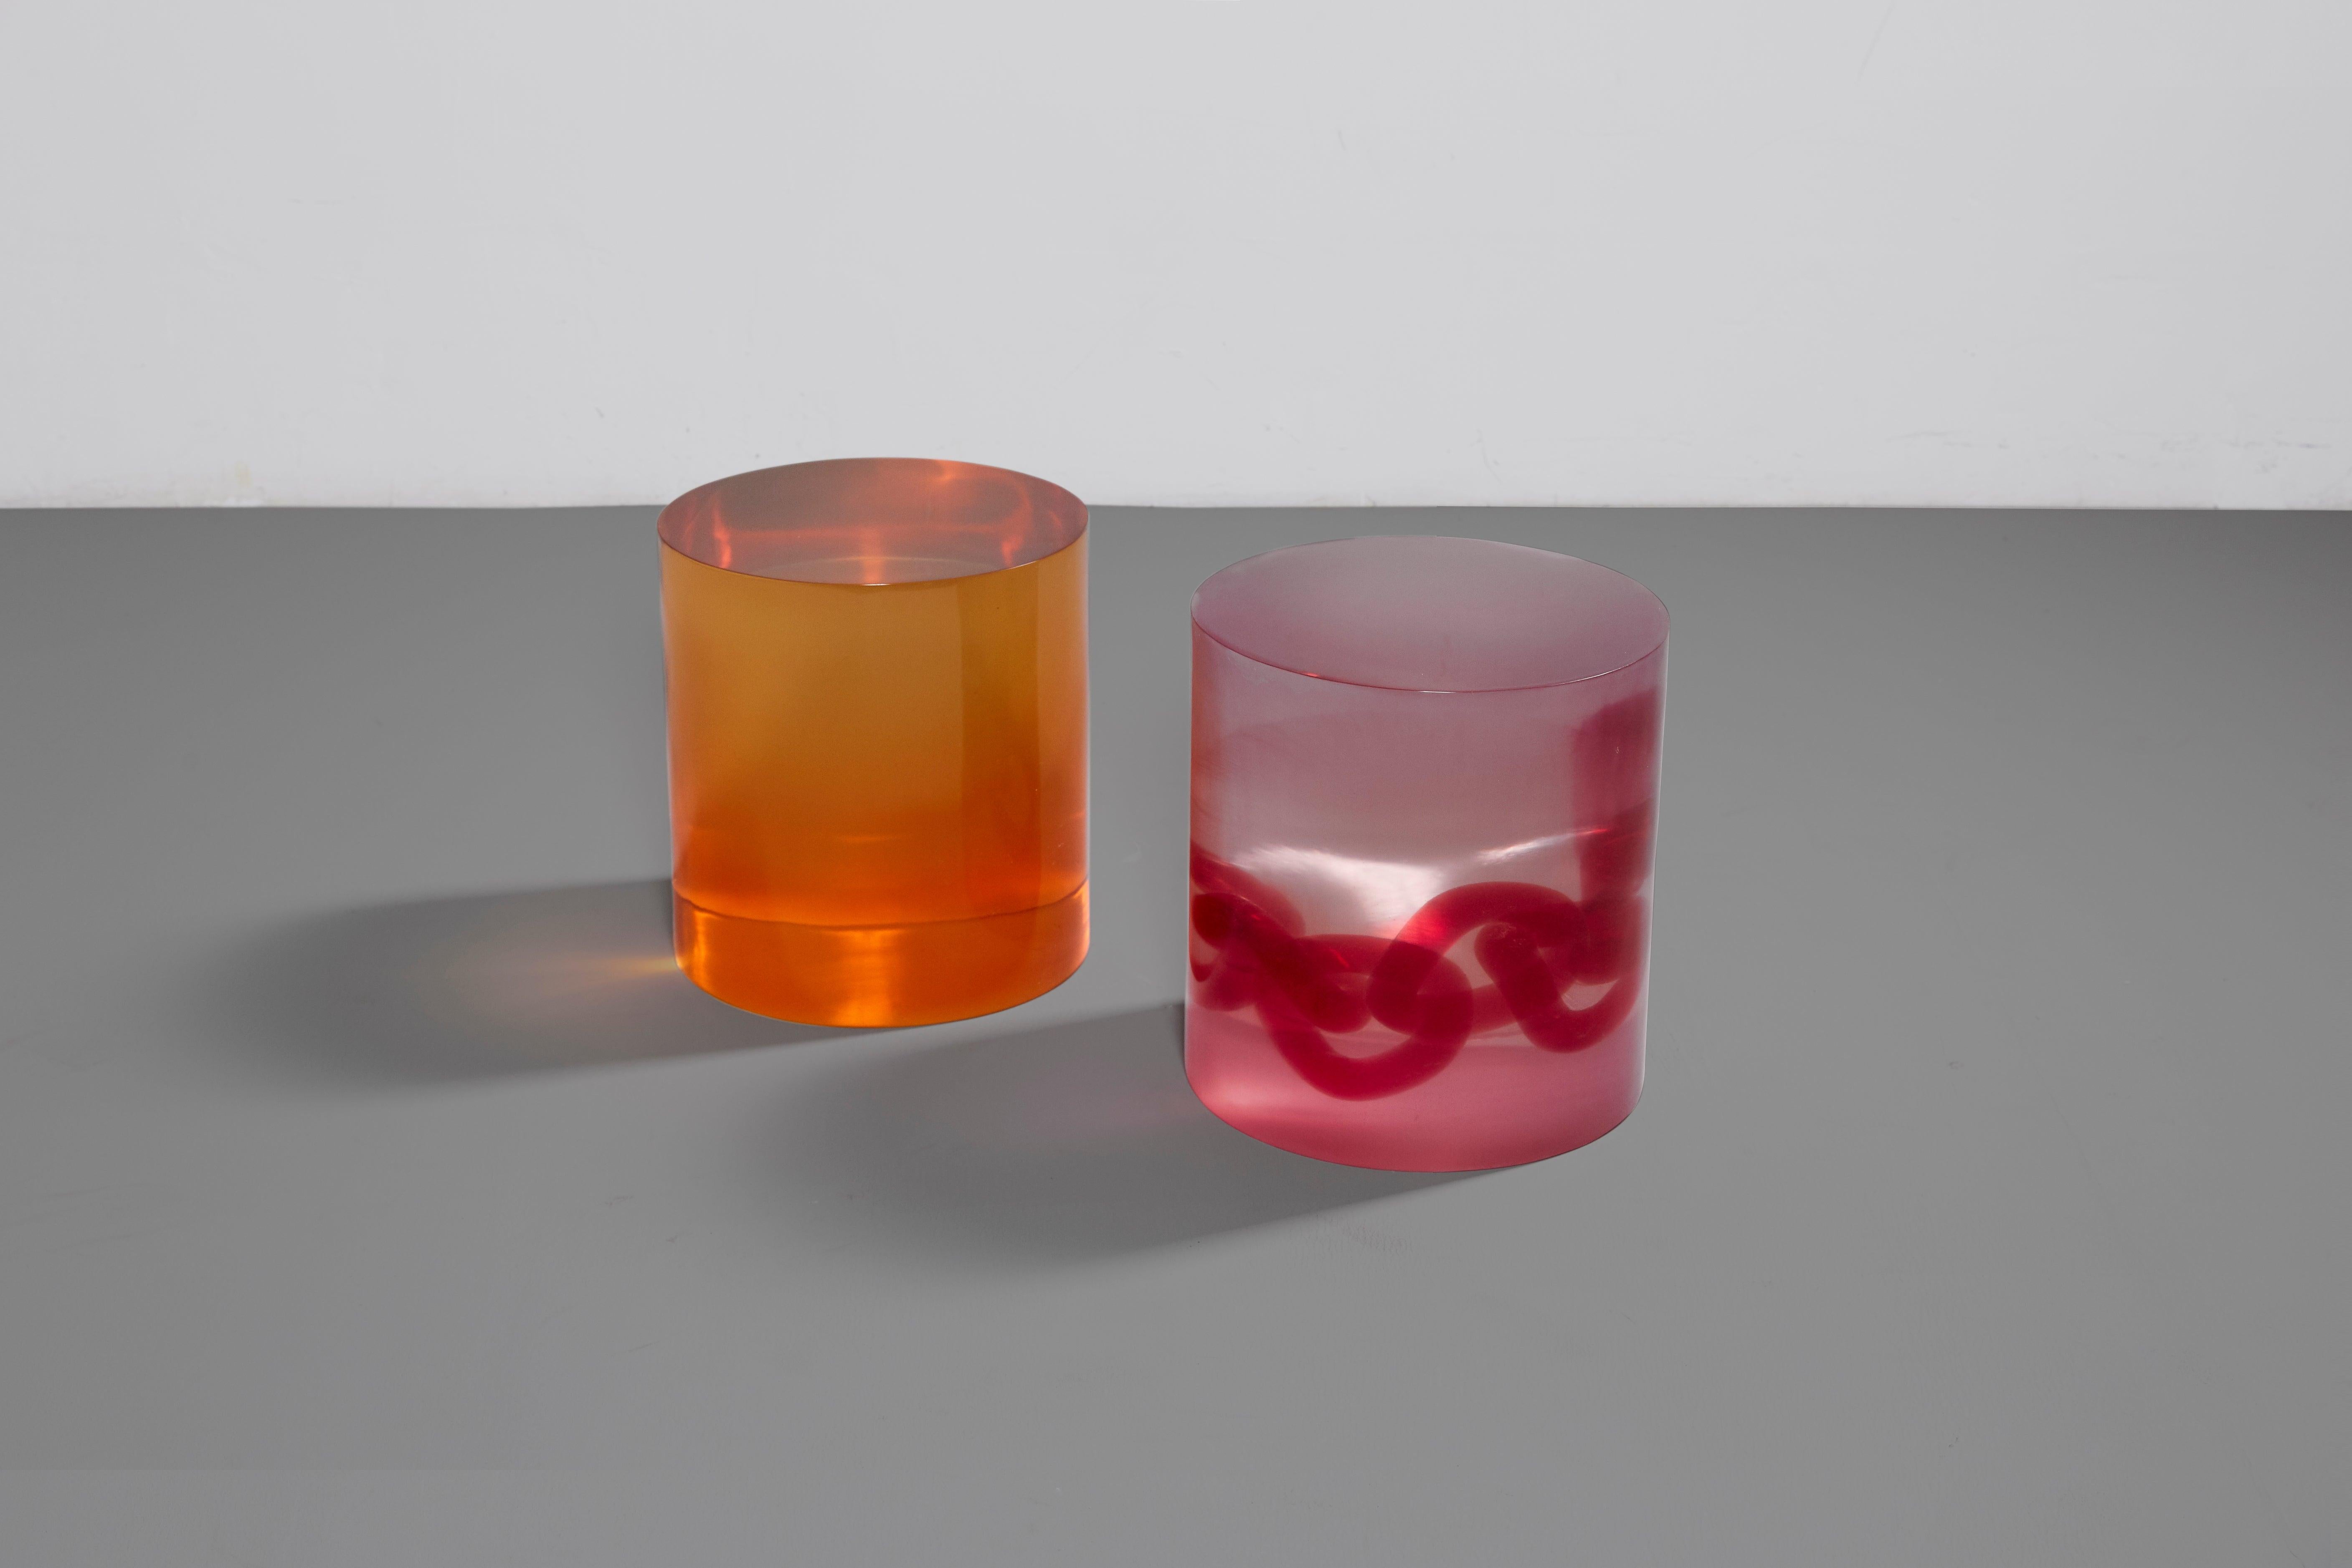 Chinese Seeing Through Your Illusions Chain, Pink Translucent Resin Stool by Hua Wang For Sale